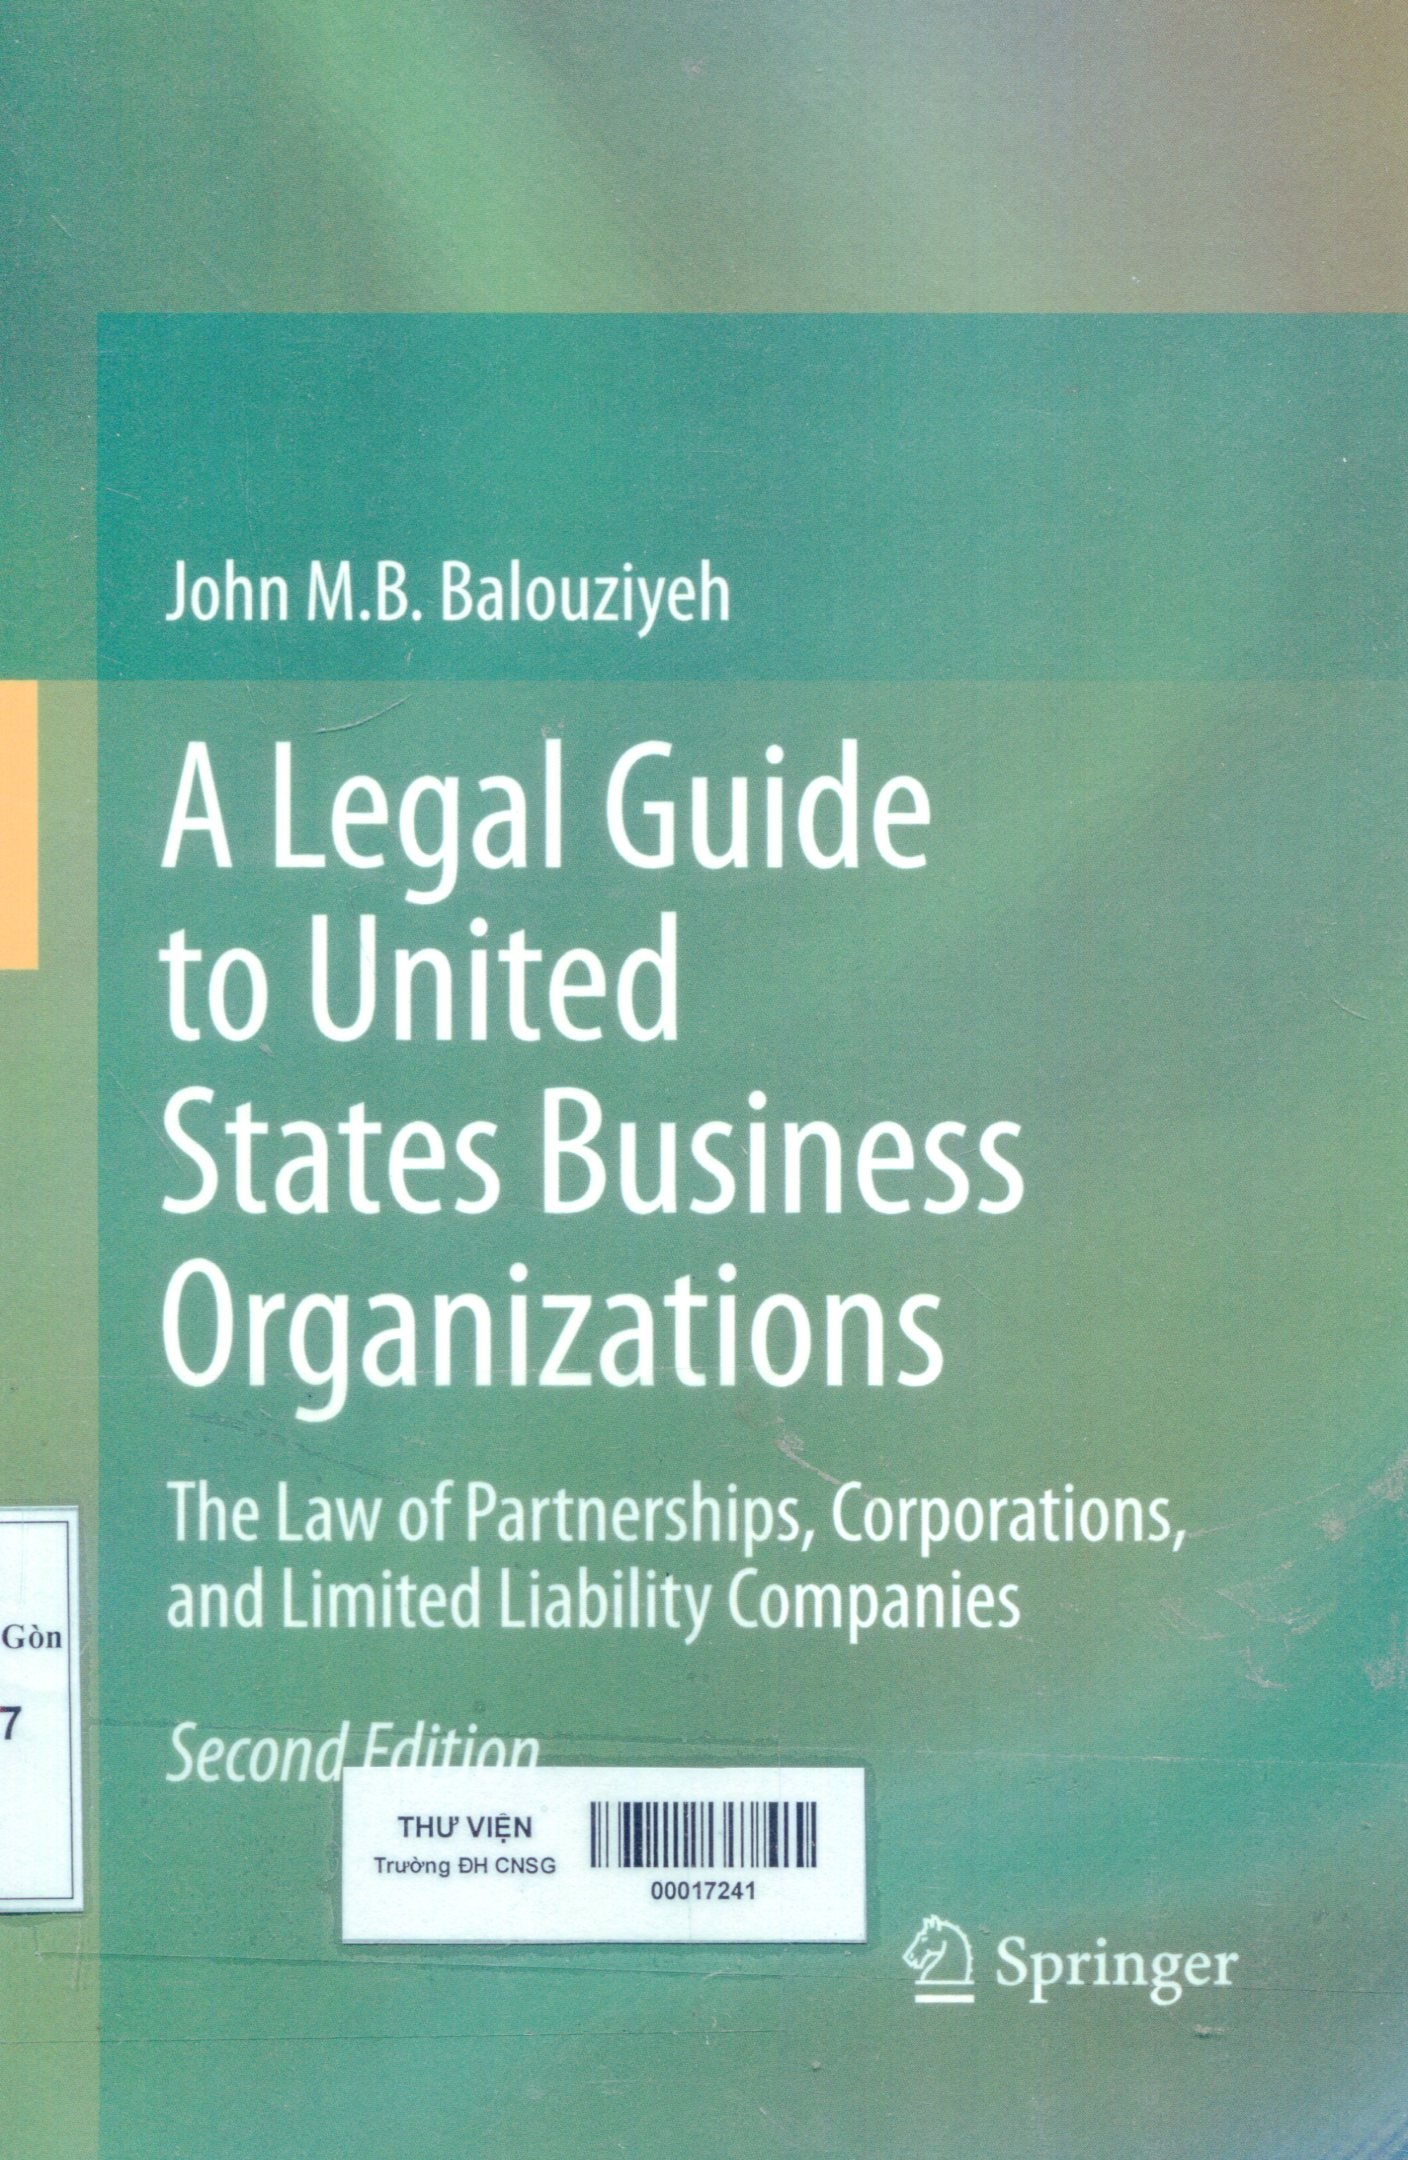 A legal guide to United States business organizations : the law of partnerships, corporations, and limited liability companies